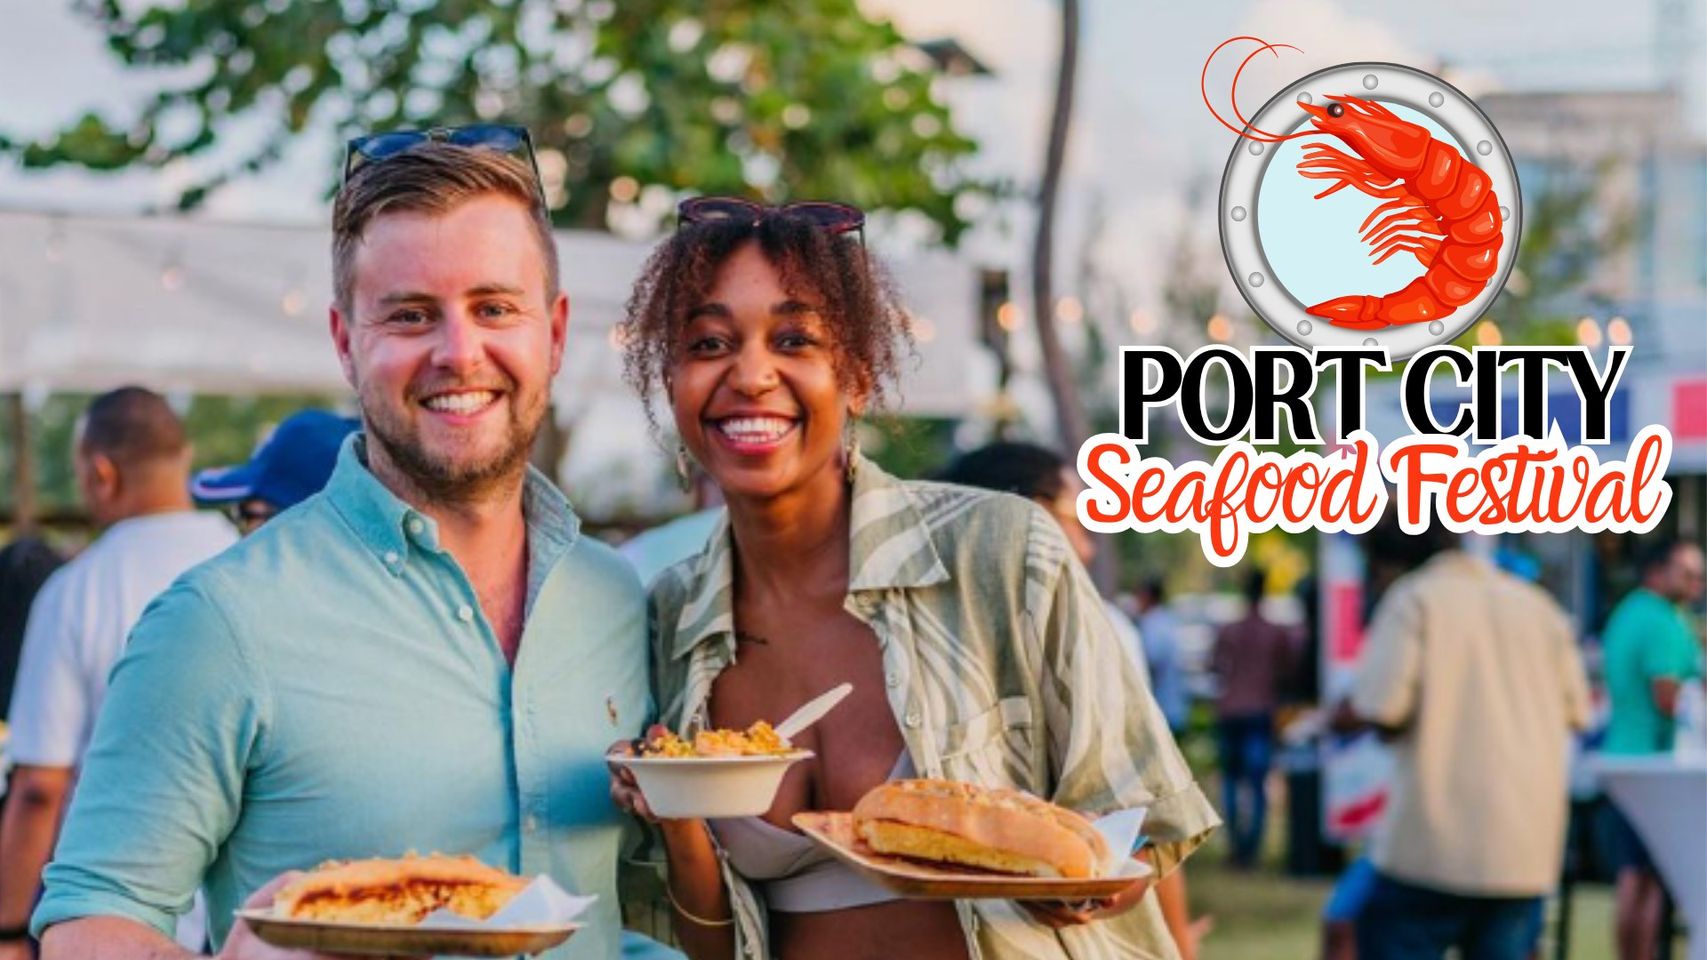 Port City Seafood Festival Event Poster